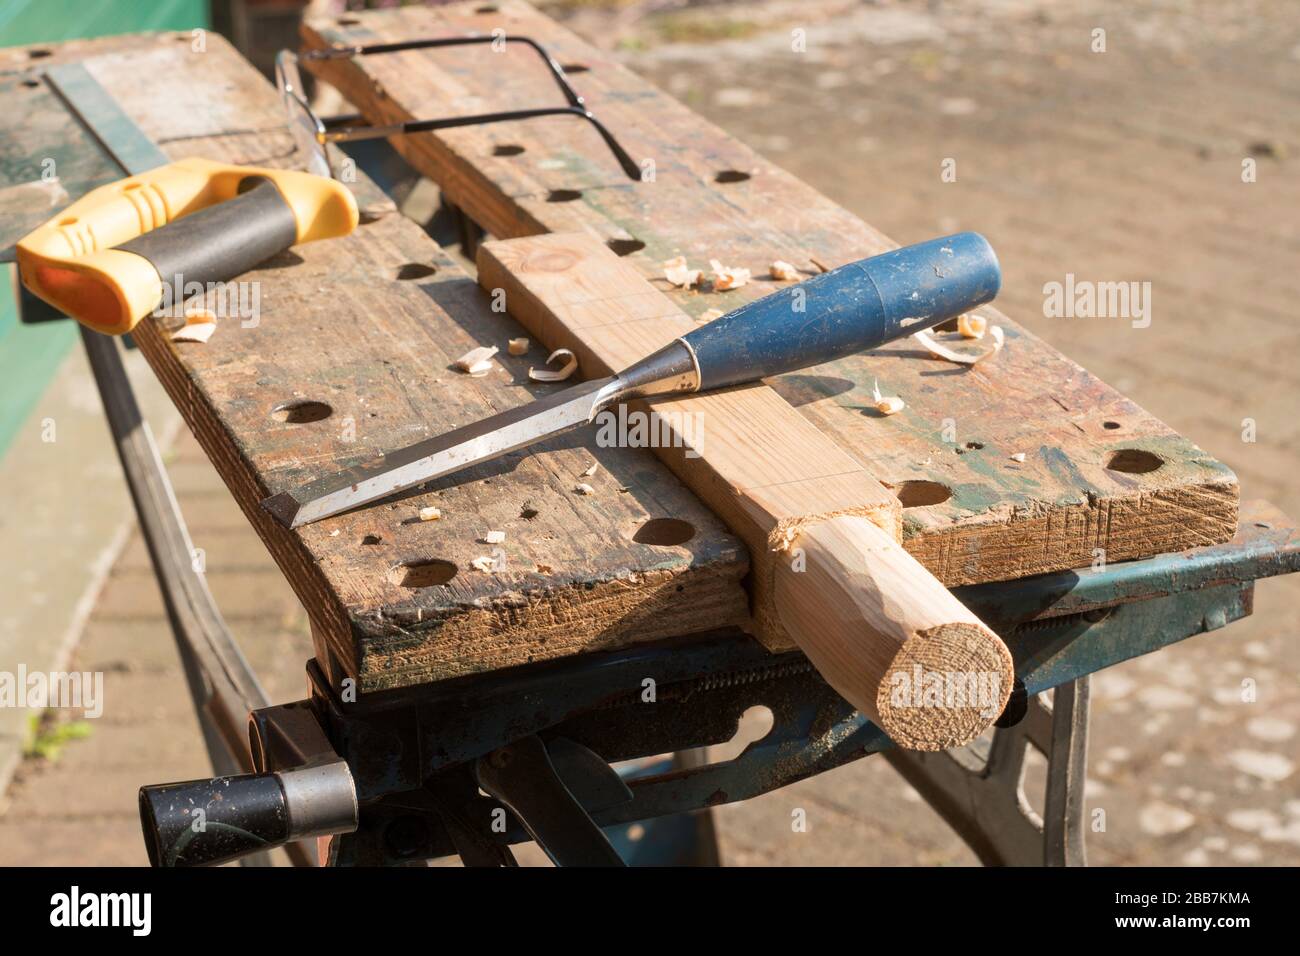 DIY a wooden workpiece held in a Workmate vice with a wood chisel, saw and spectacles in the background Stock Photo